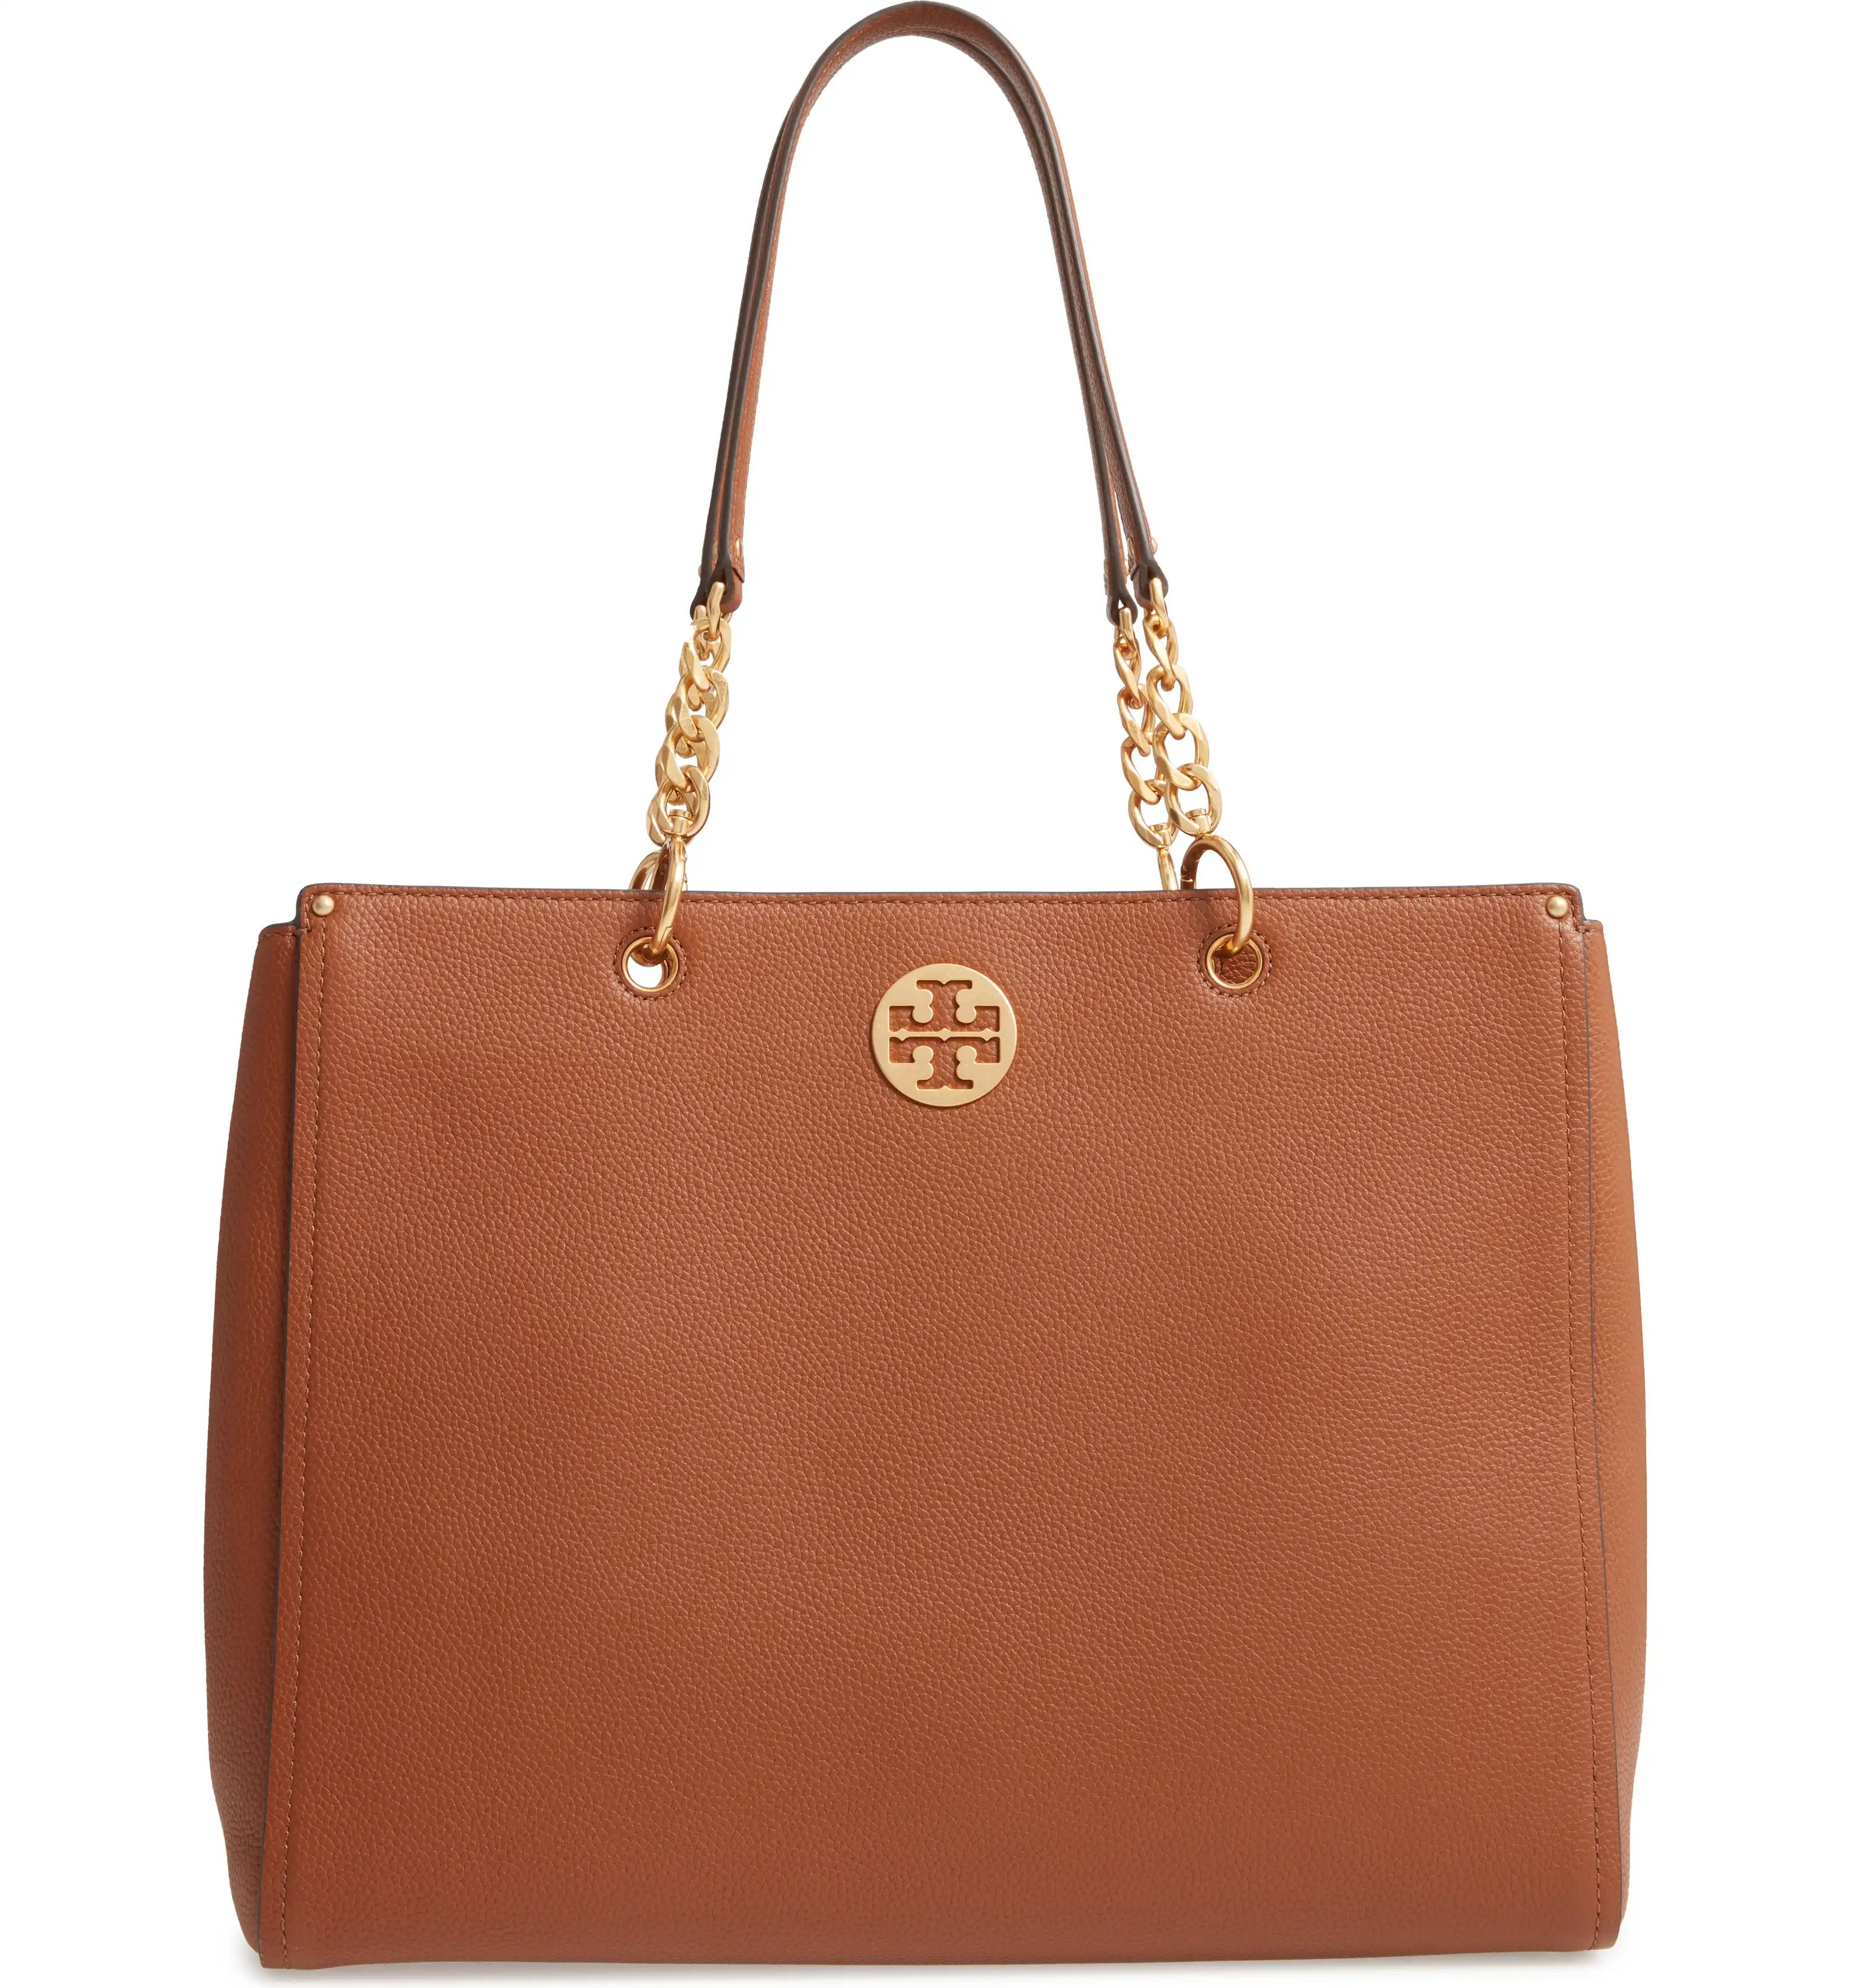 Everly Leather Tote | Nordstrom